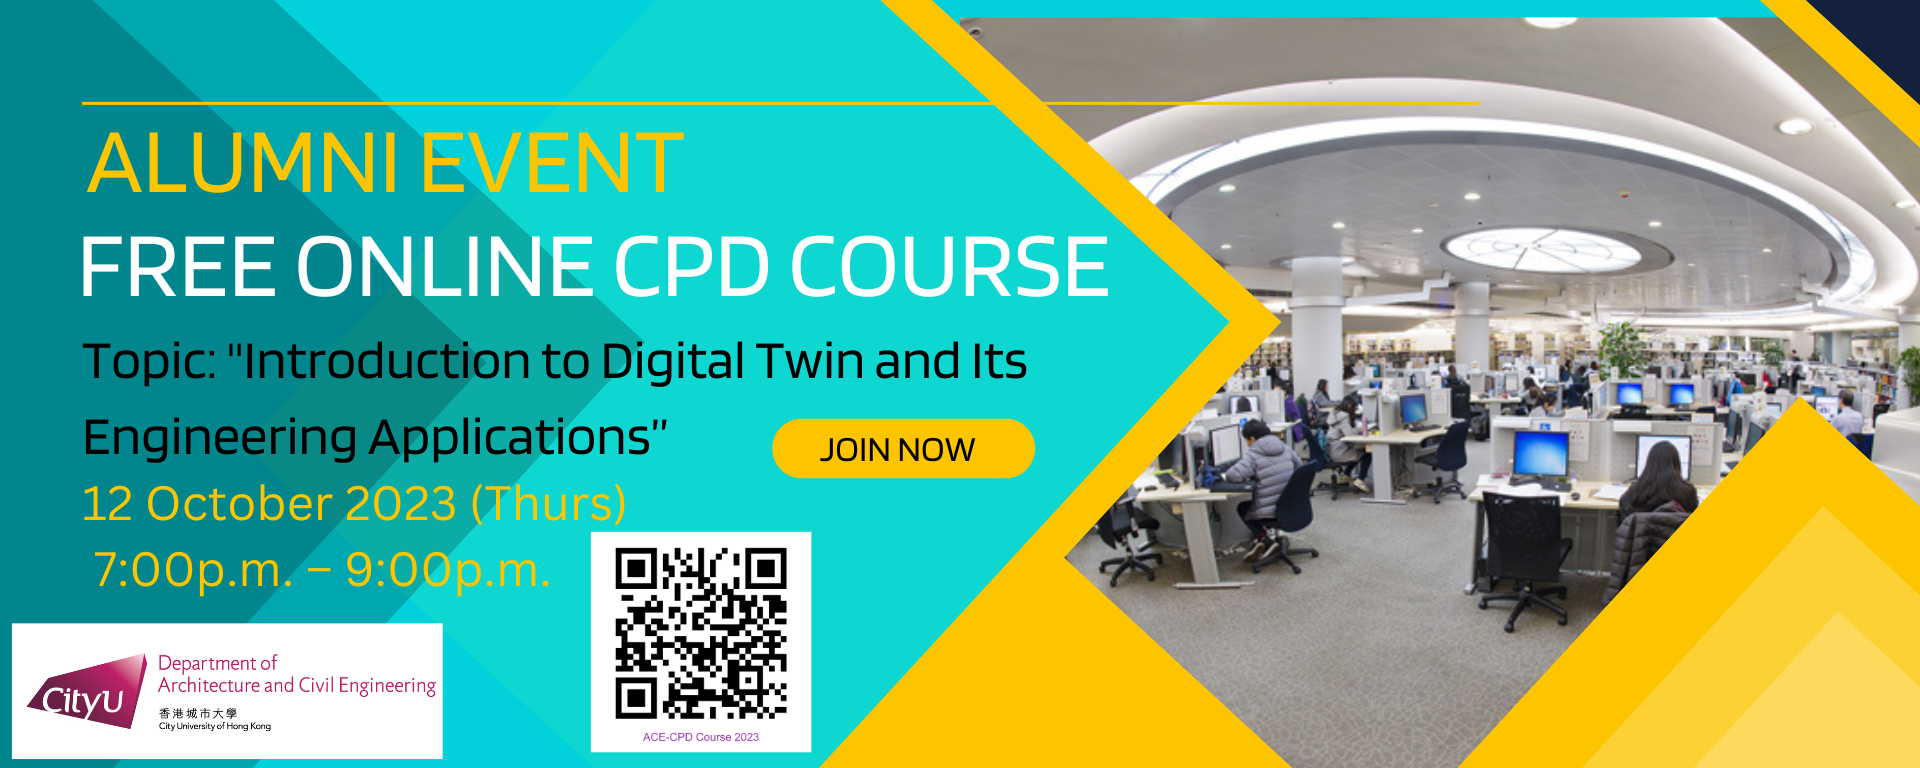 Alumni Event- FREE ONLINE CPD Course